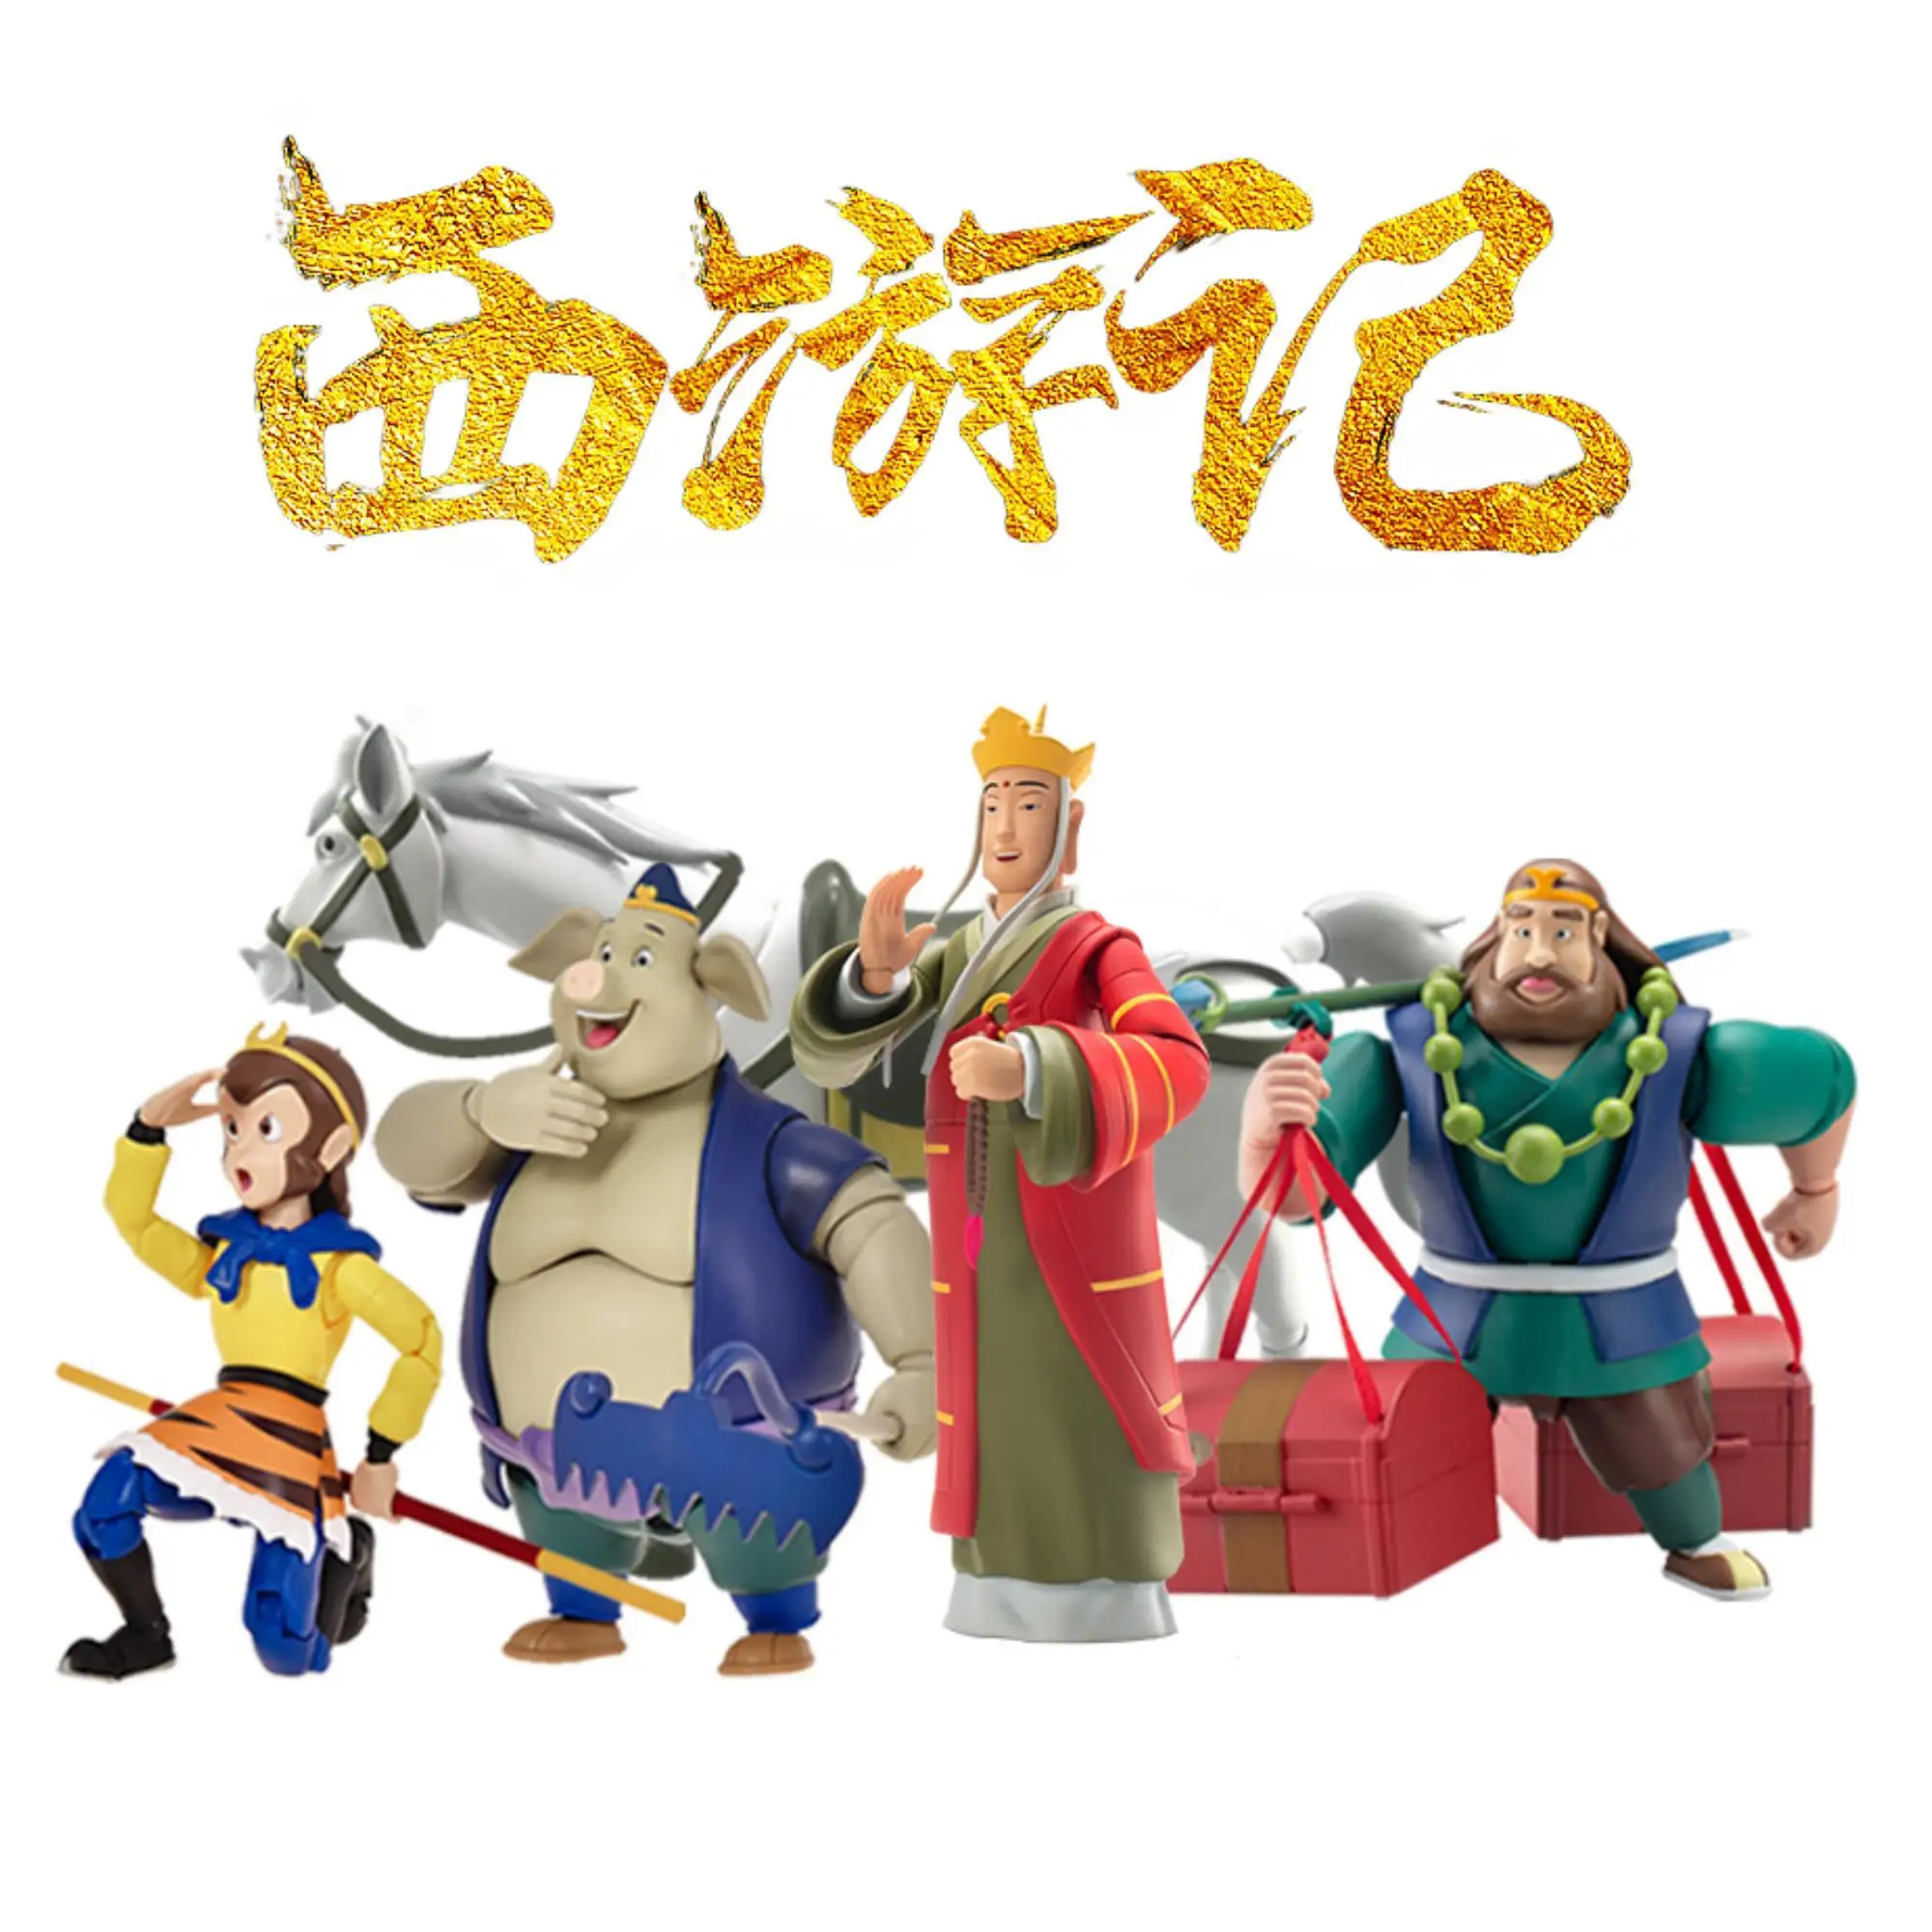 

13cm Official Genuine Journey To The West Sun Wukong Porky Pig Removable Anime Figure Model Pvc Toy Doll Childhood Gift